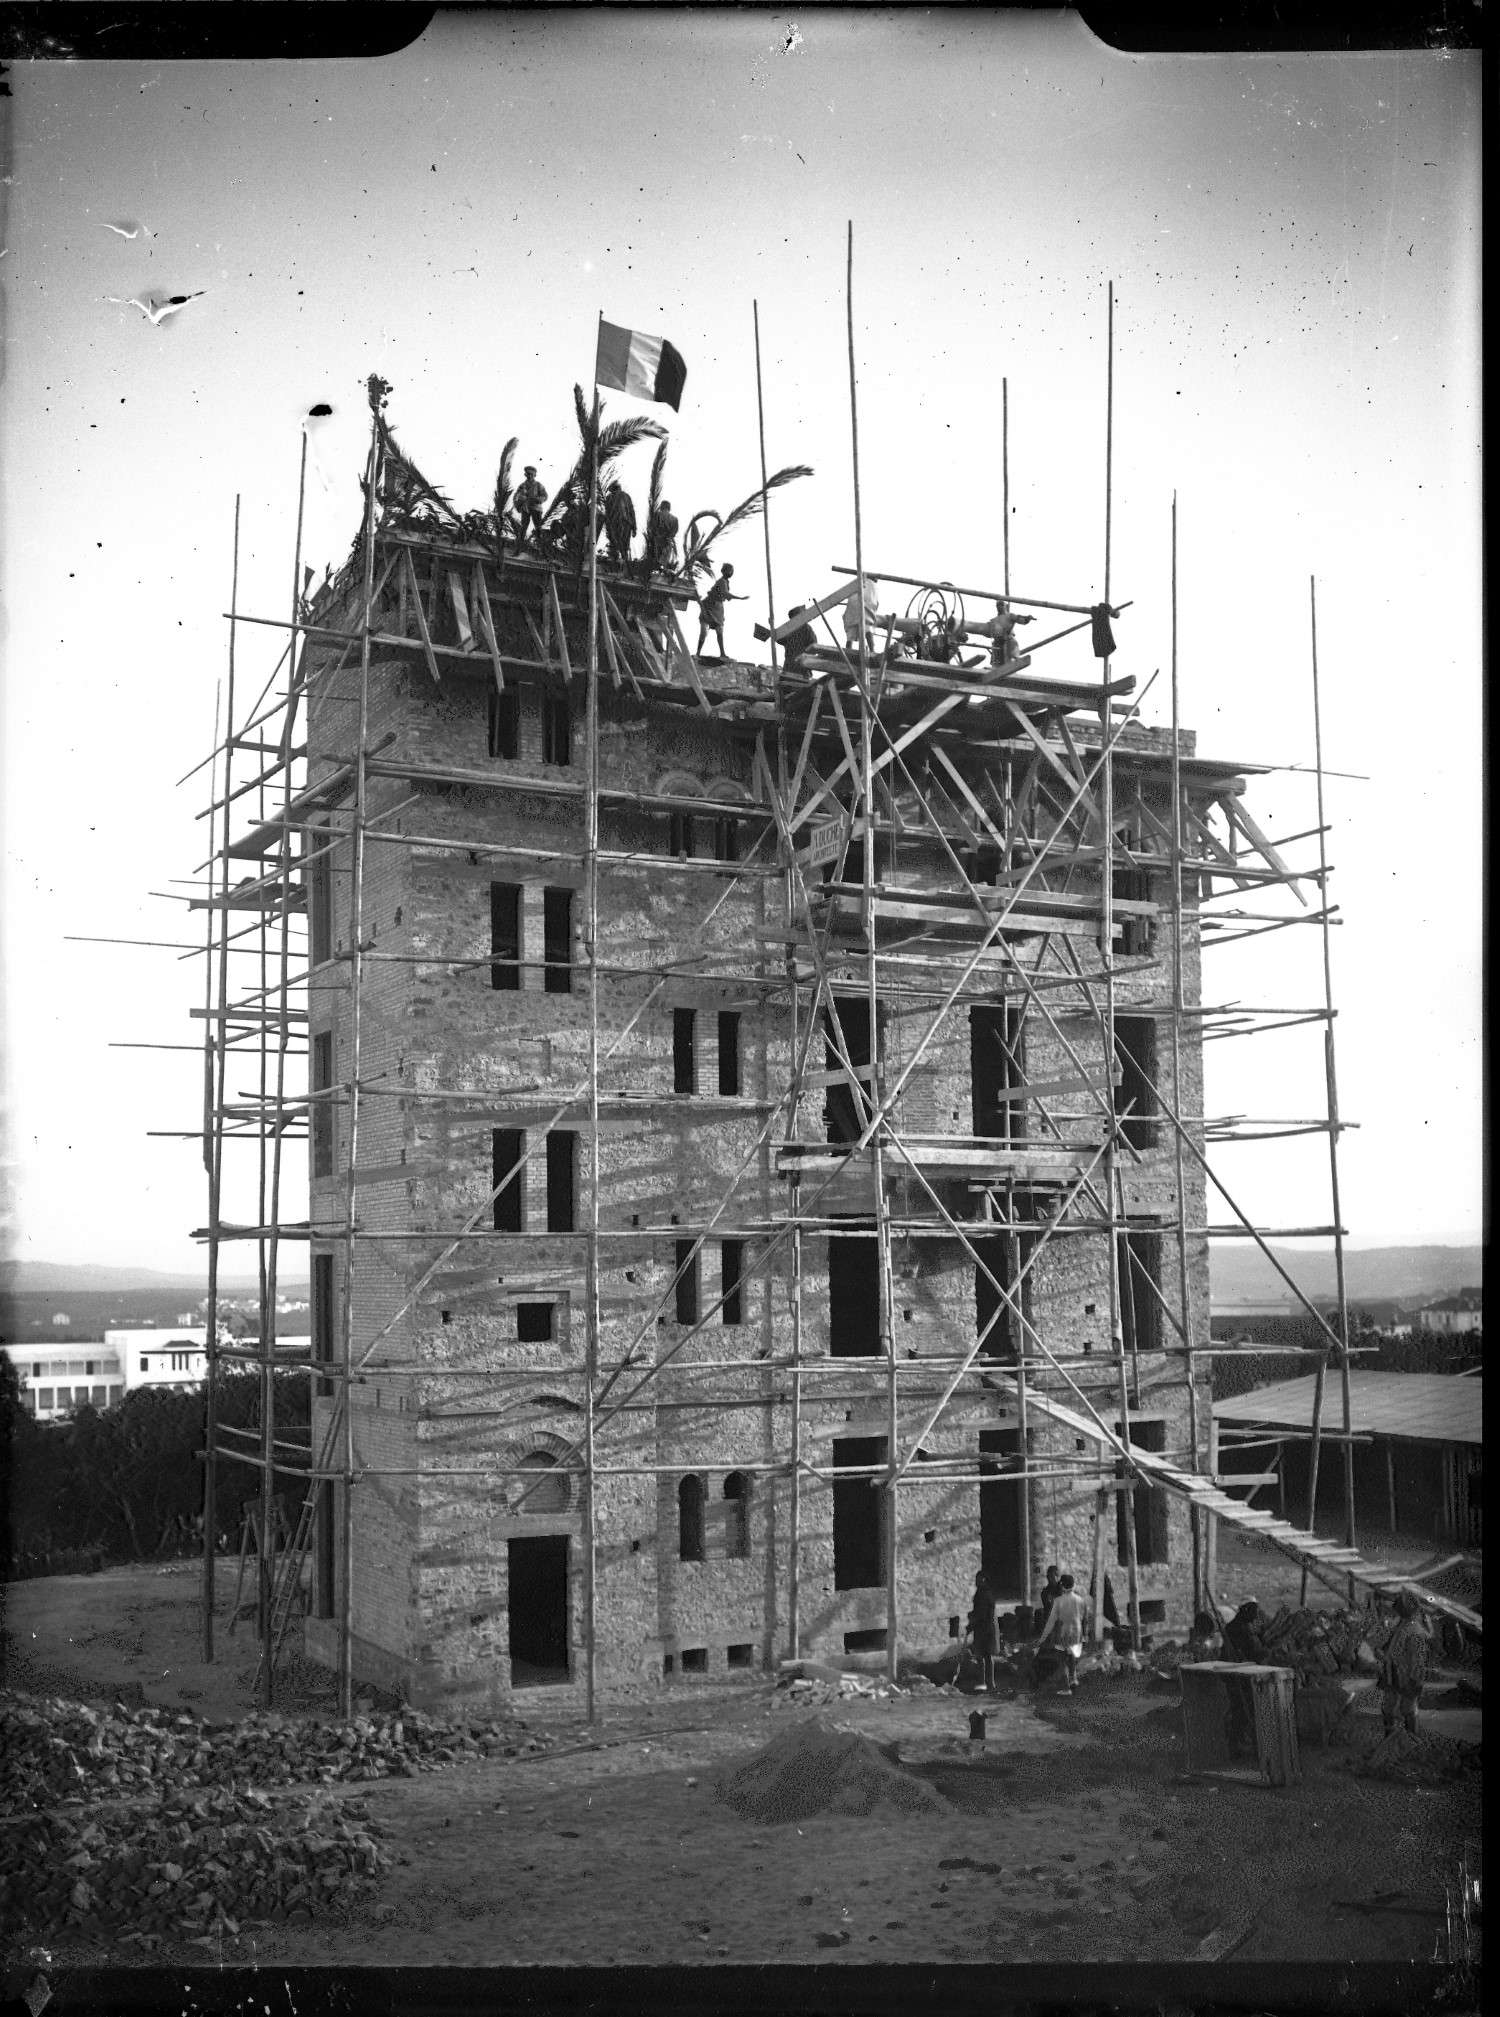 The building at 65 rue Foucauld, surrounded by scaffolding in its first phase of construction.